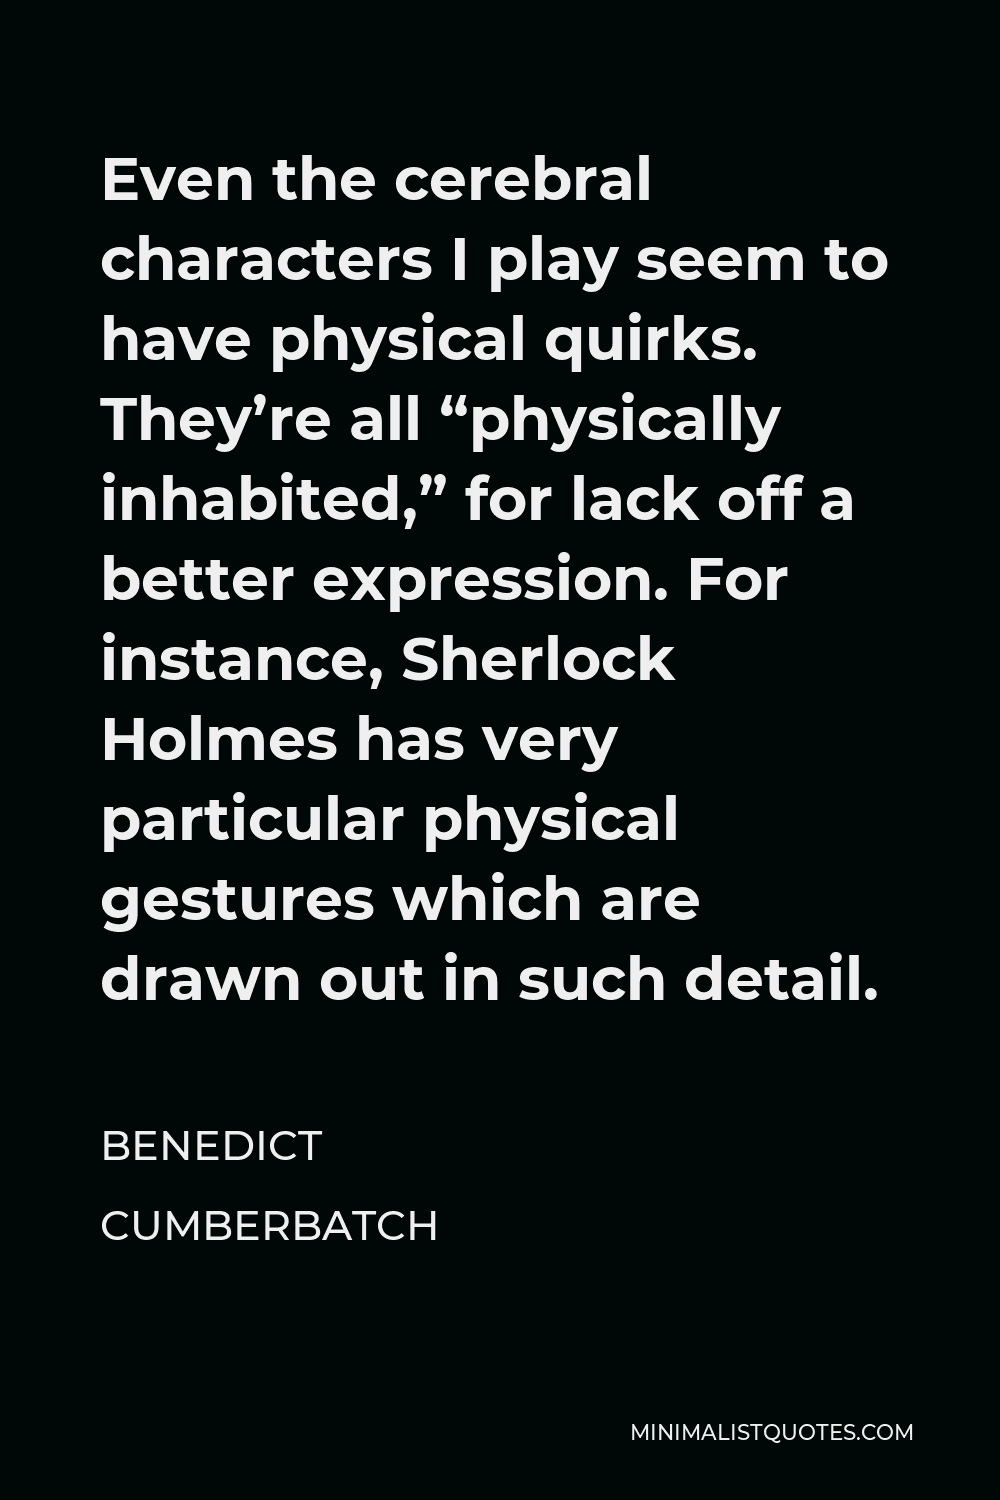 Benedict Cumberbatch Quote - Even the cerebral characters I play seem to have physical quirks. They’re all “physically inhabited,” for lack off a better expression. For instance, Sherlock Holmes has very particular physical gestures which are drawn out in such detail.